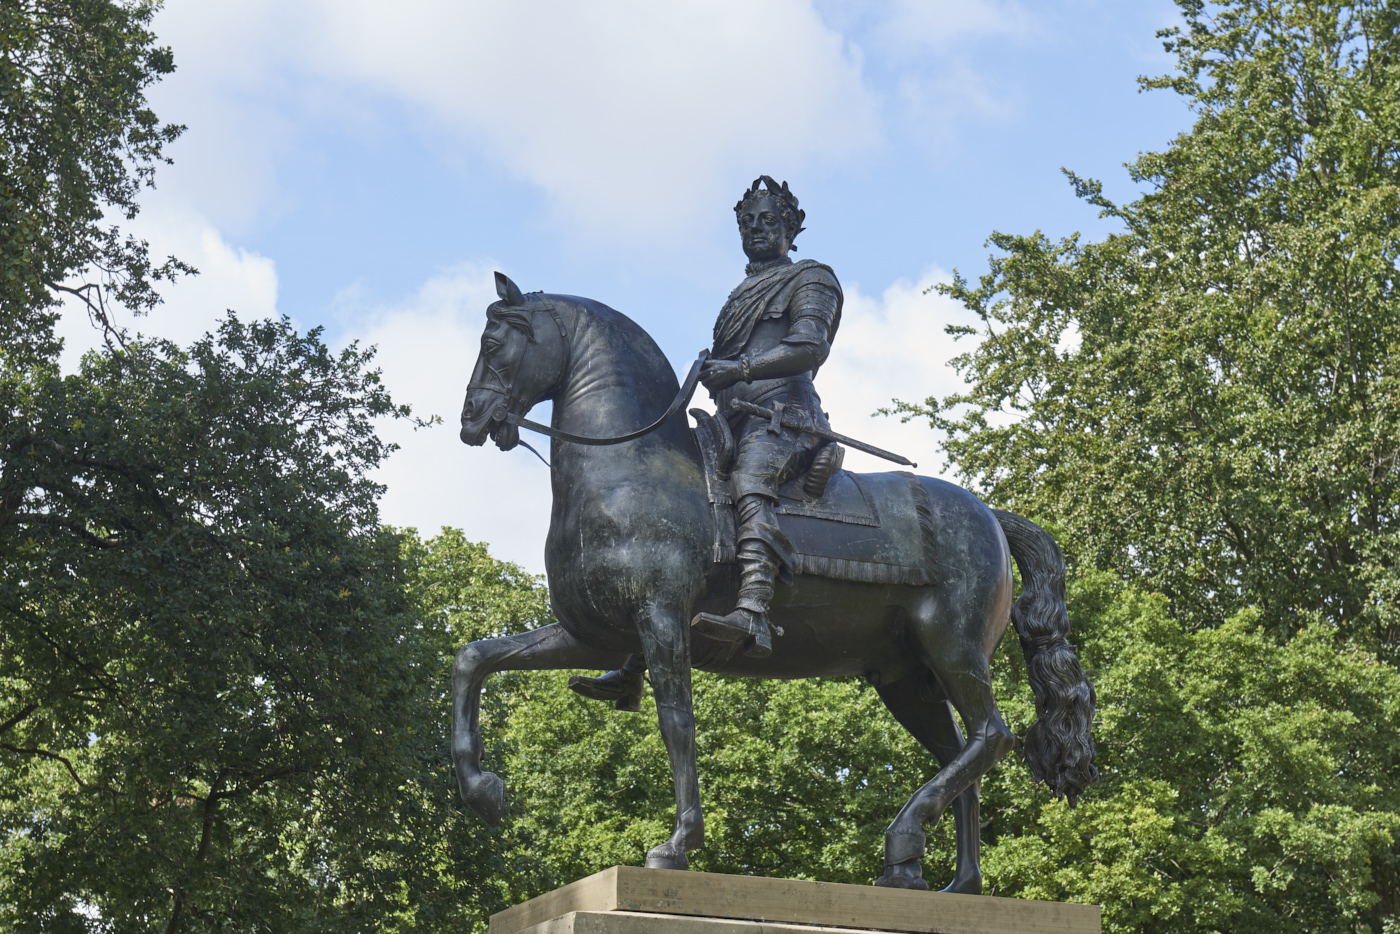 Bronze sculpture of King George I on Horseback by John Nost II with tree foliage in background